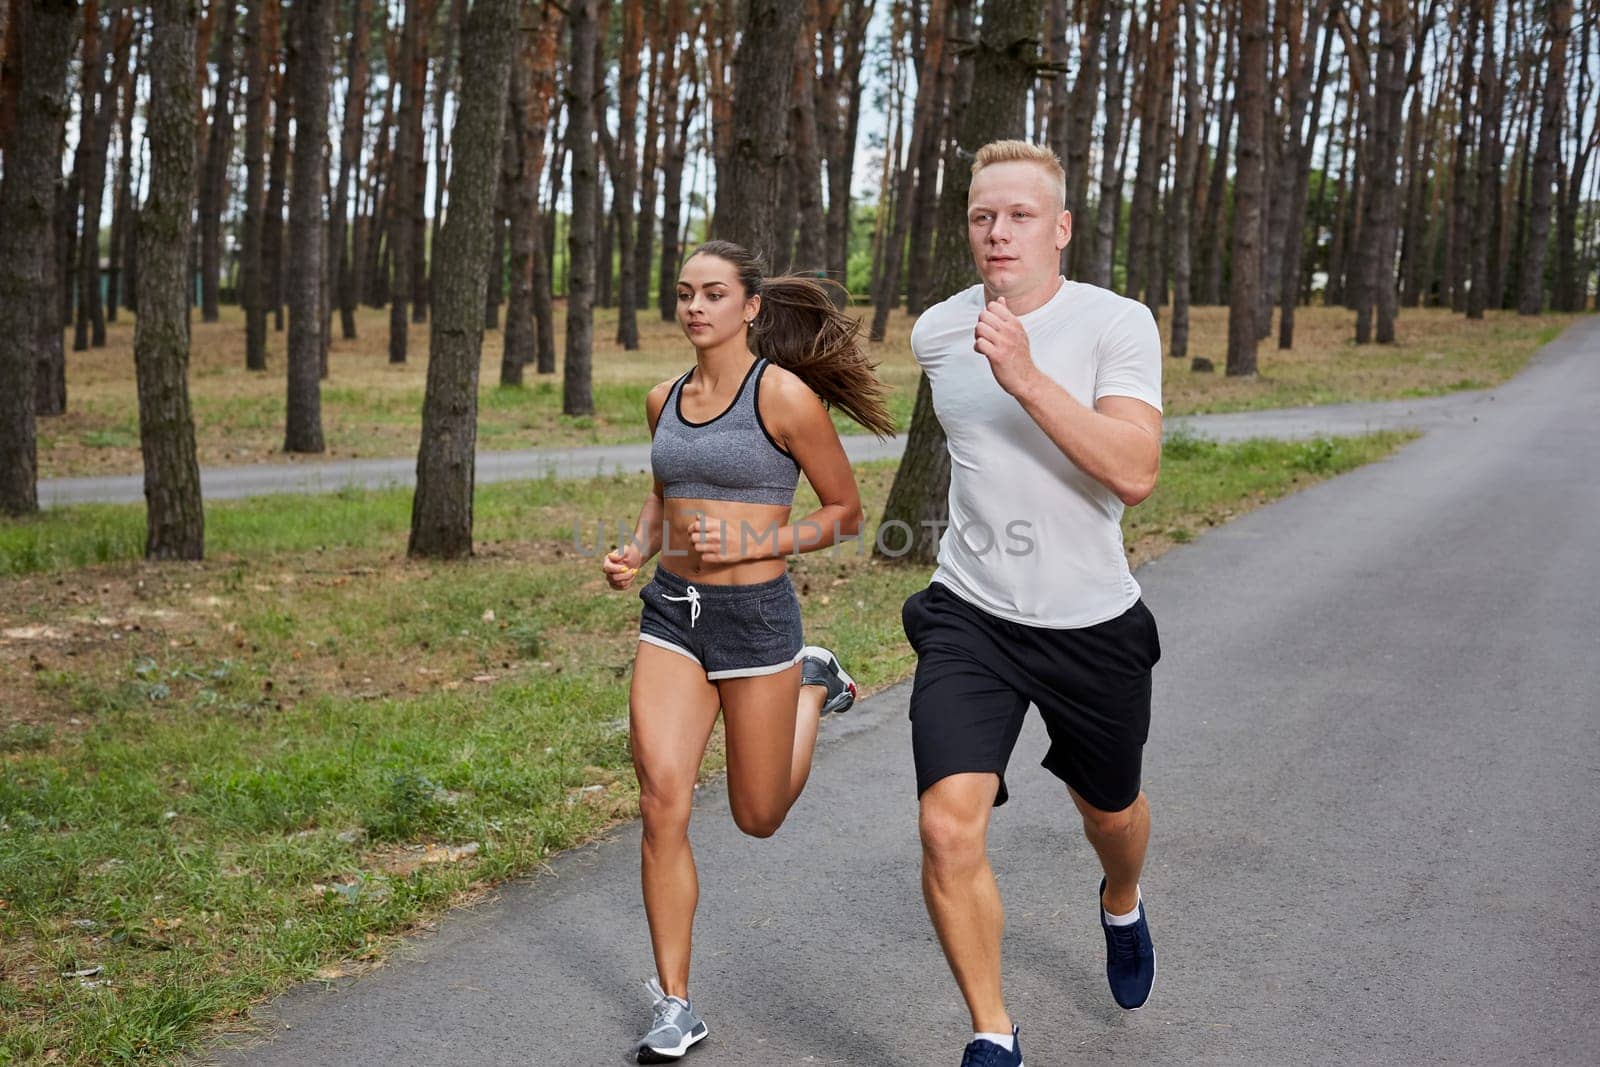 Couple running in forest. athletes make training, motion blur